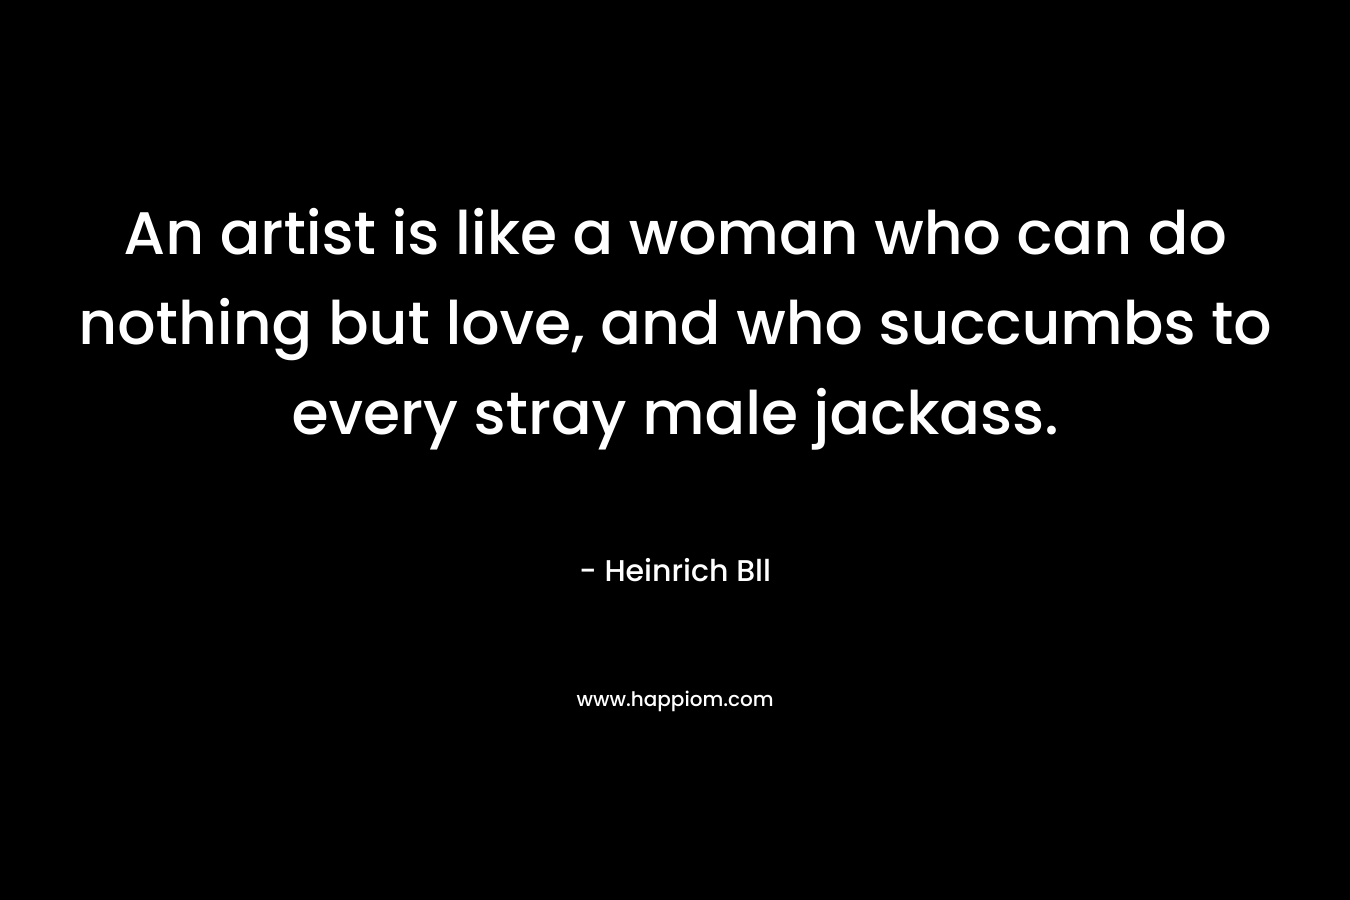 An artist is like a woman who can do nothing but love, and who succumbs to every stray male jackass. – Heinrich Bll